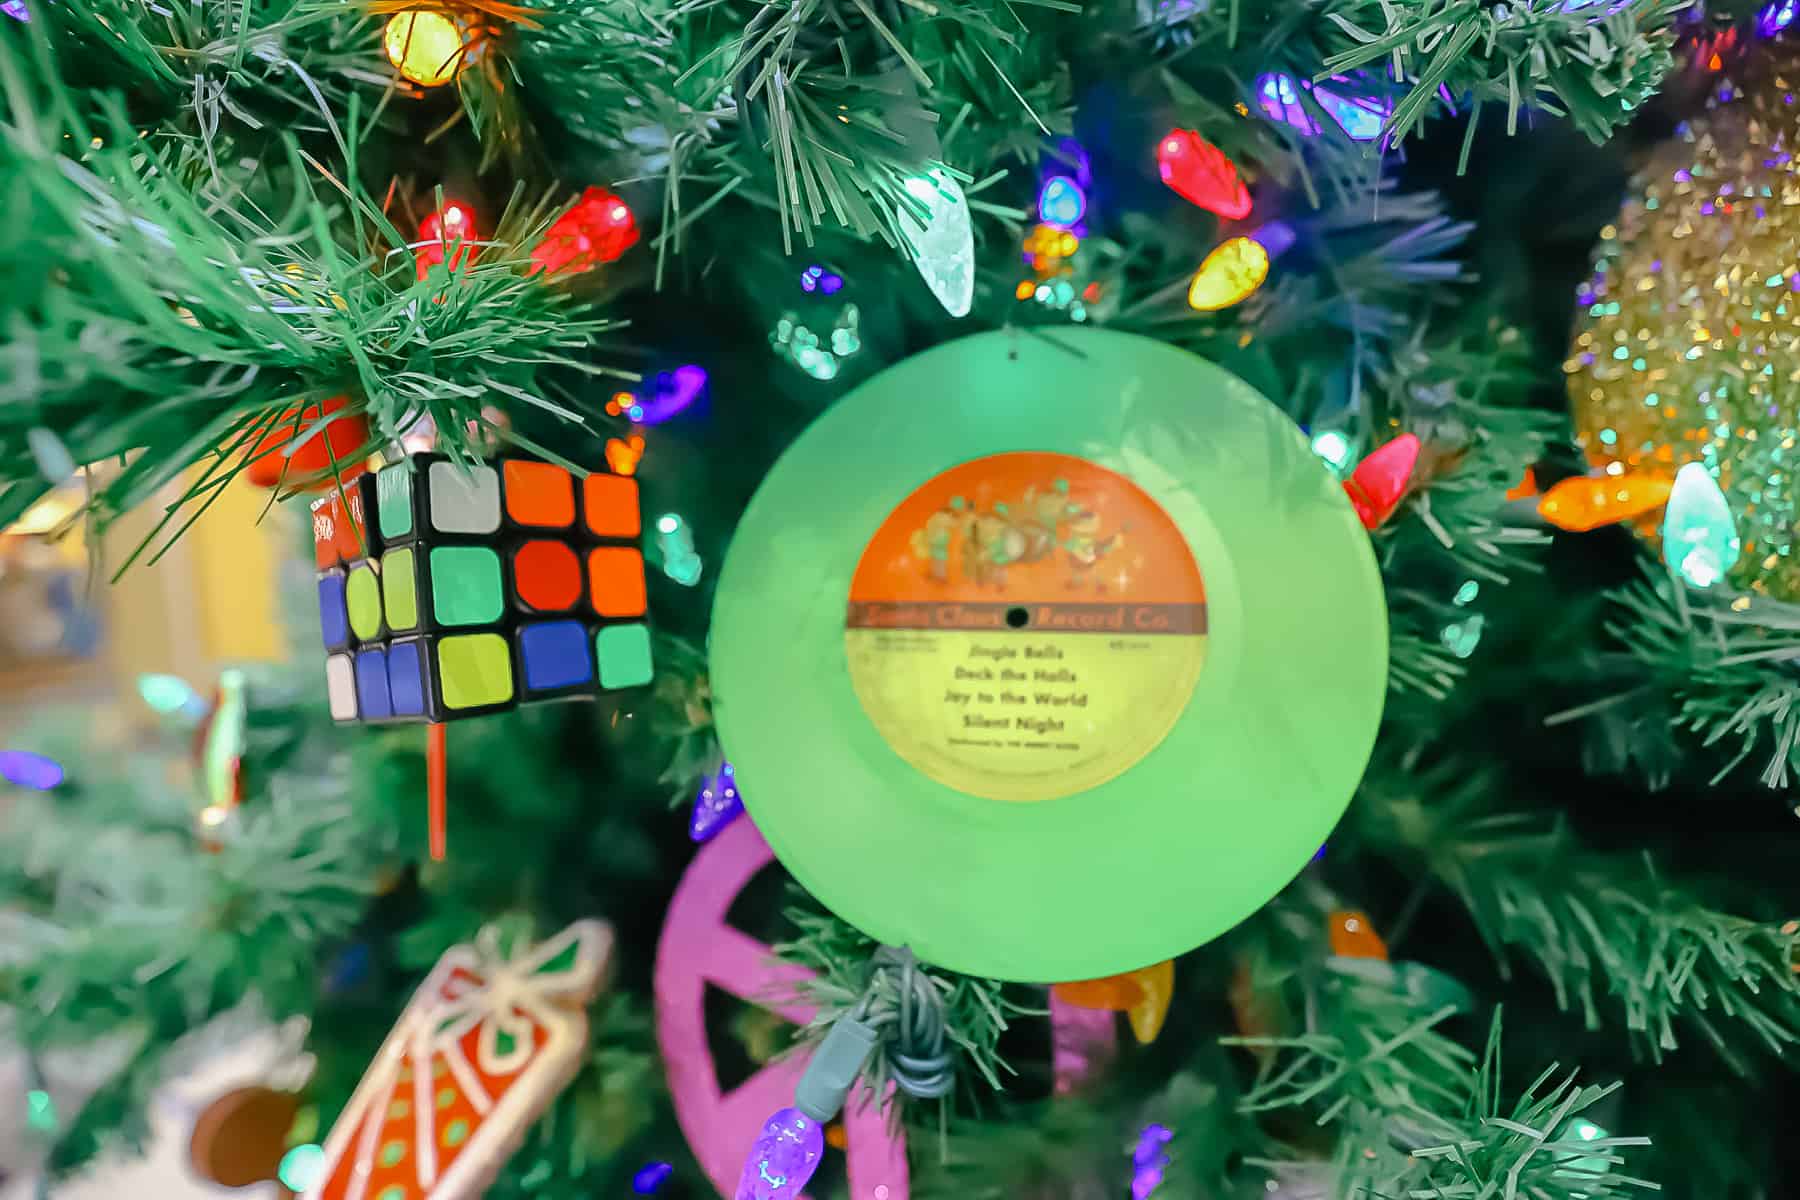 An old fashioned record and Rubik's cube decorate the tree at Pop Century. 